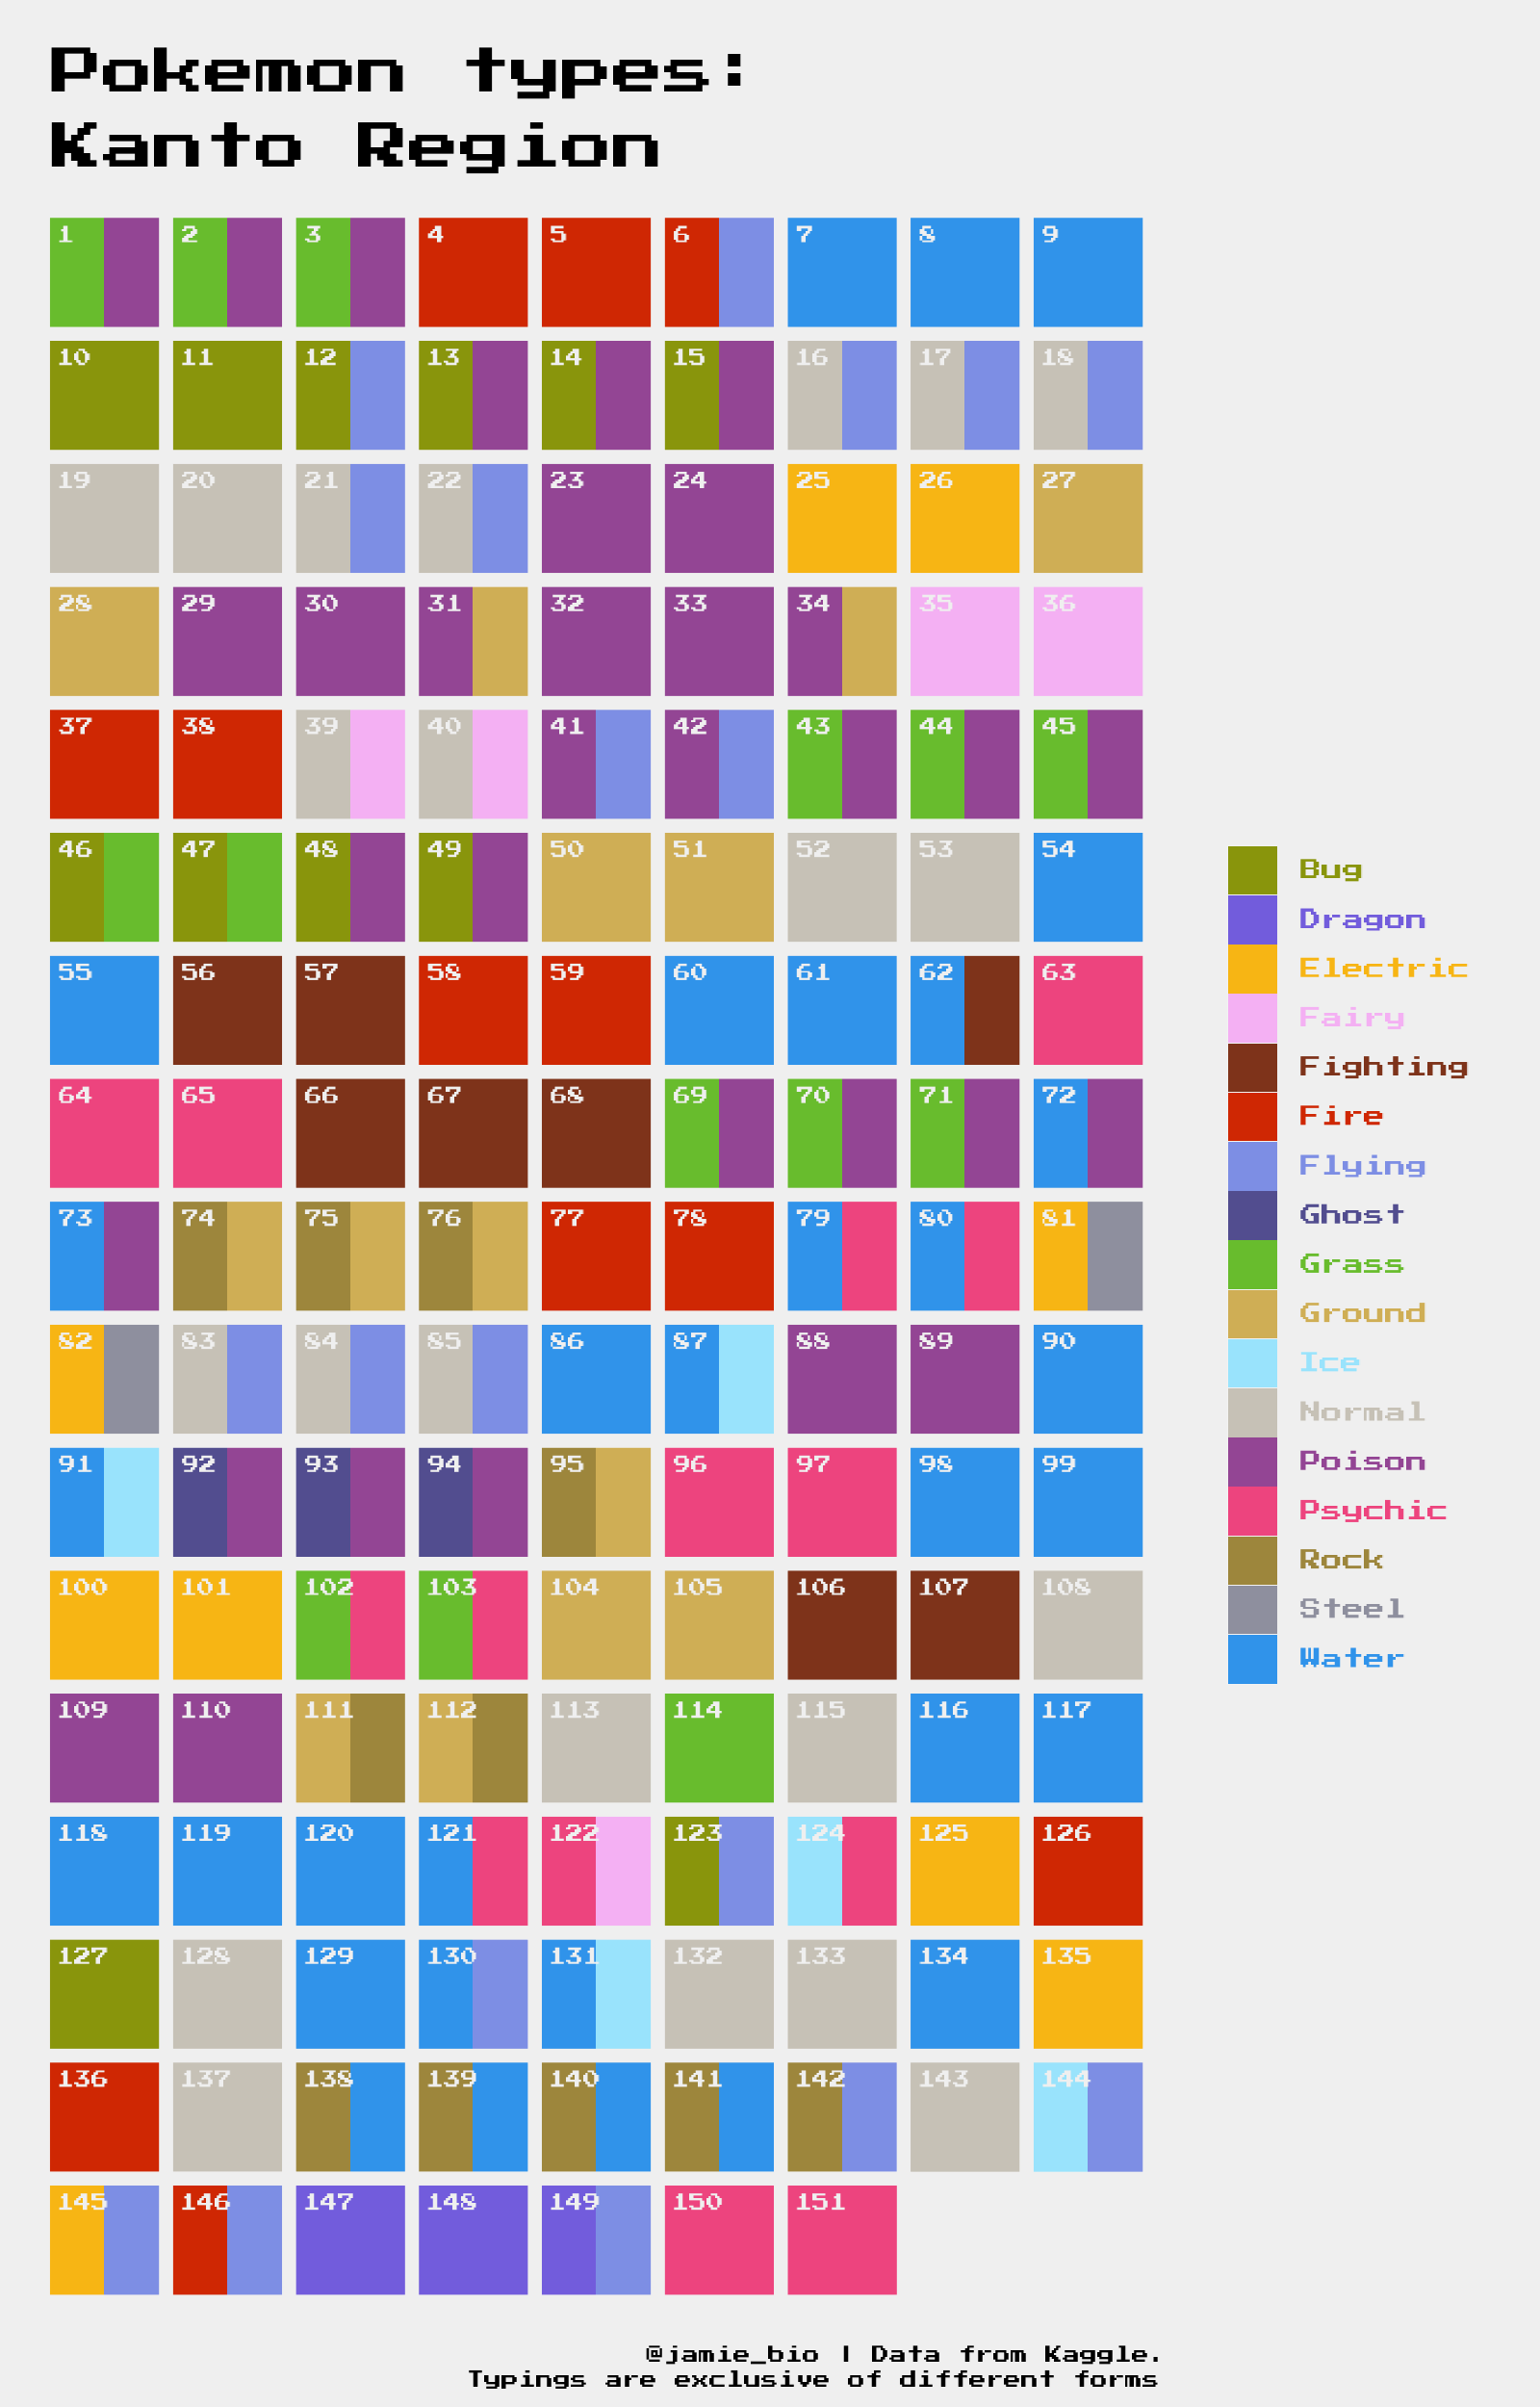 Colors Live - POKEMON TYPE CHART by I AM AWESOME :P